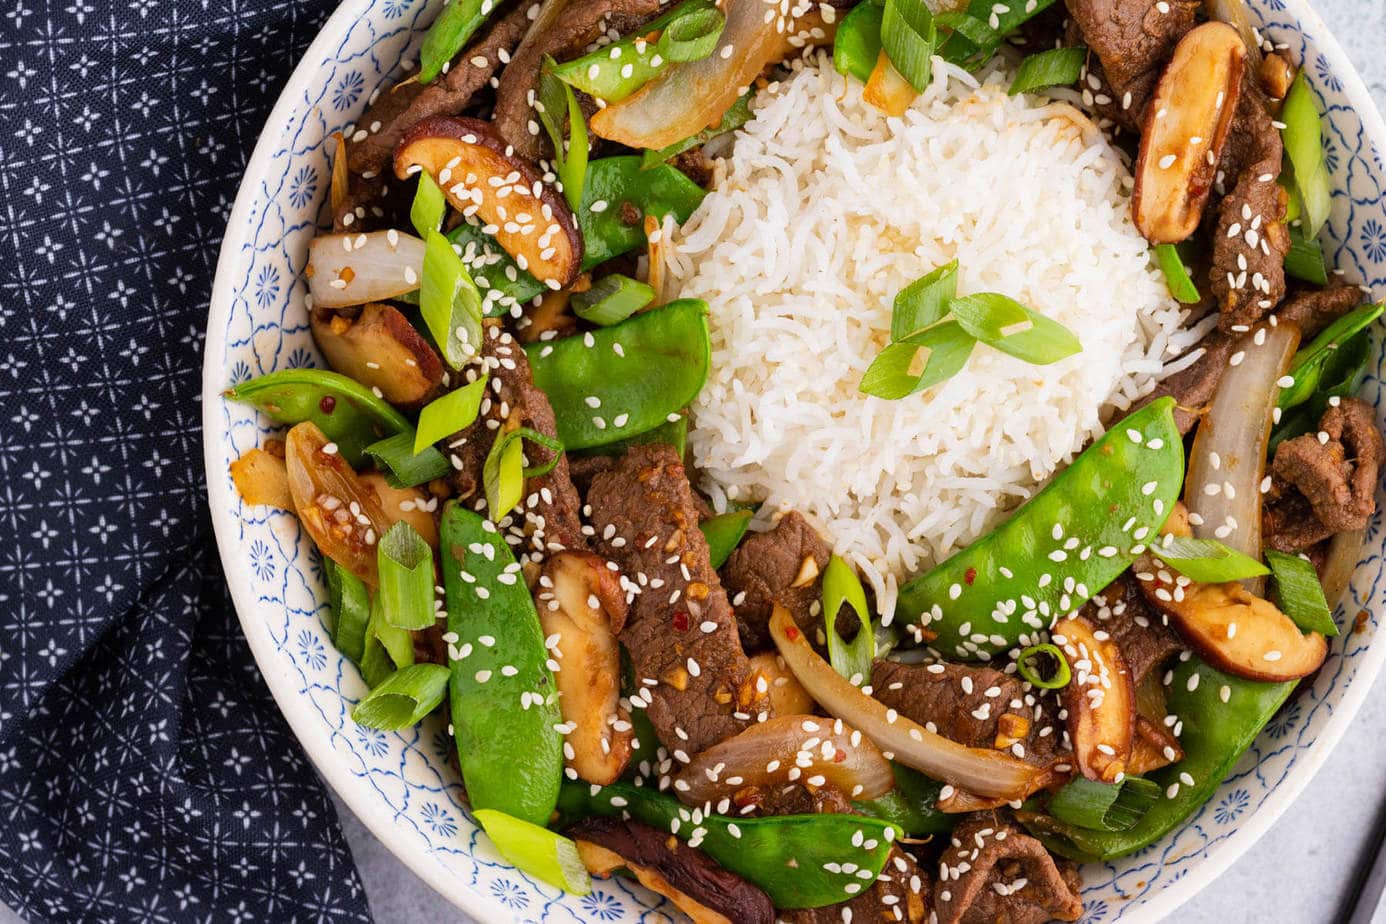 A bowl filled with beef stir fry and snow peas, white rice, shiitake mushrooms topped with sesame seeds and sliced green onions.